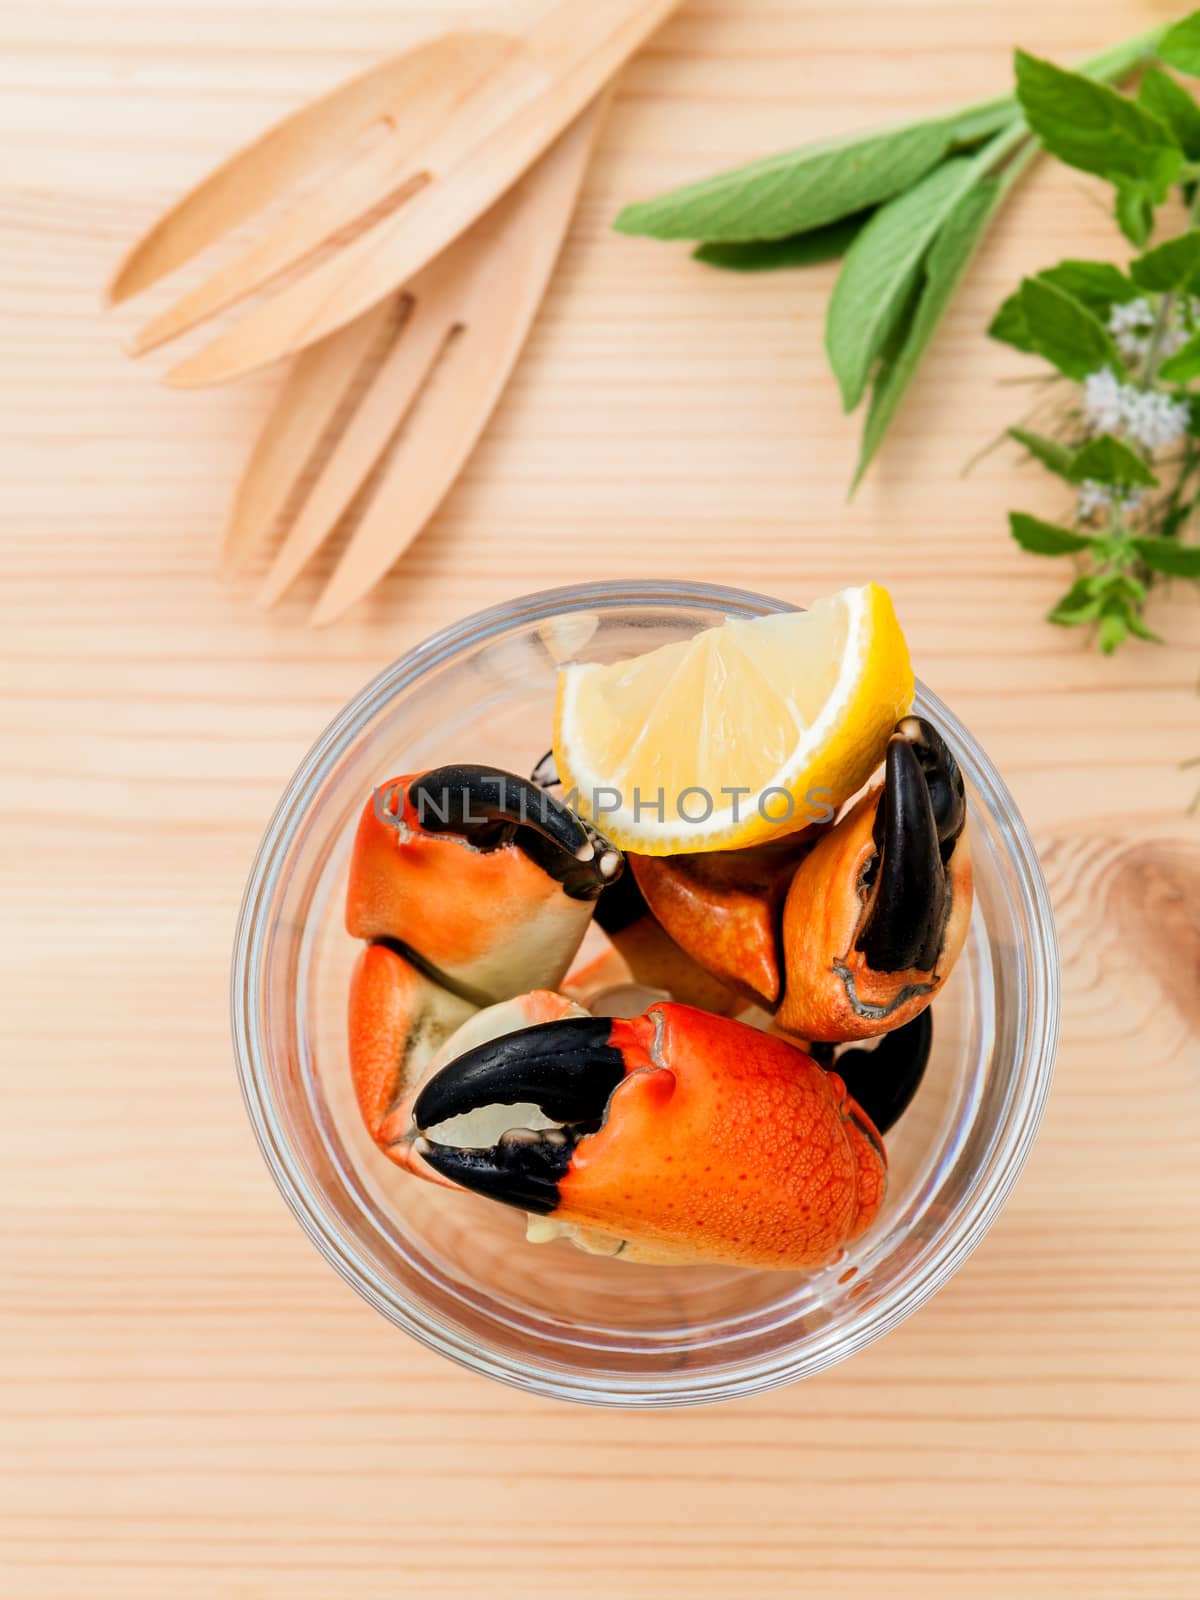 Fresh steamed red crabs leg in glass bowl . Red crabs leg with ingredients. Steamed red crabs leg with herbs Fennel ,parsley,rosemary,lemon and mint with fork on wooded background.